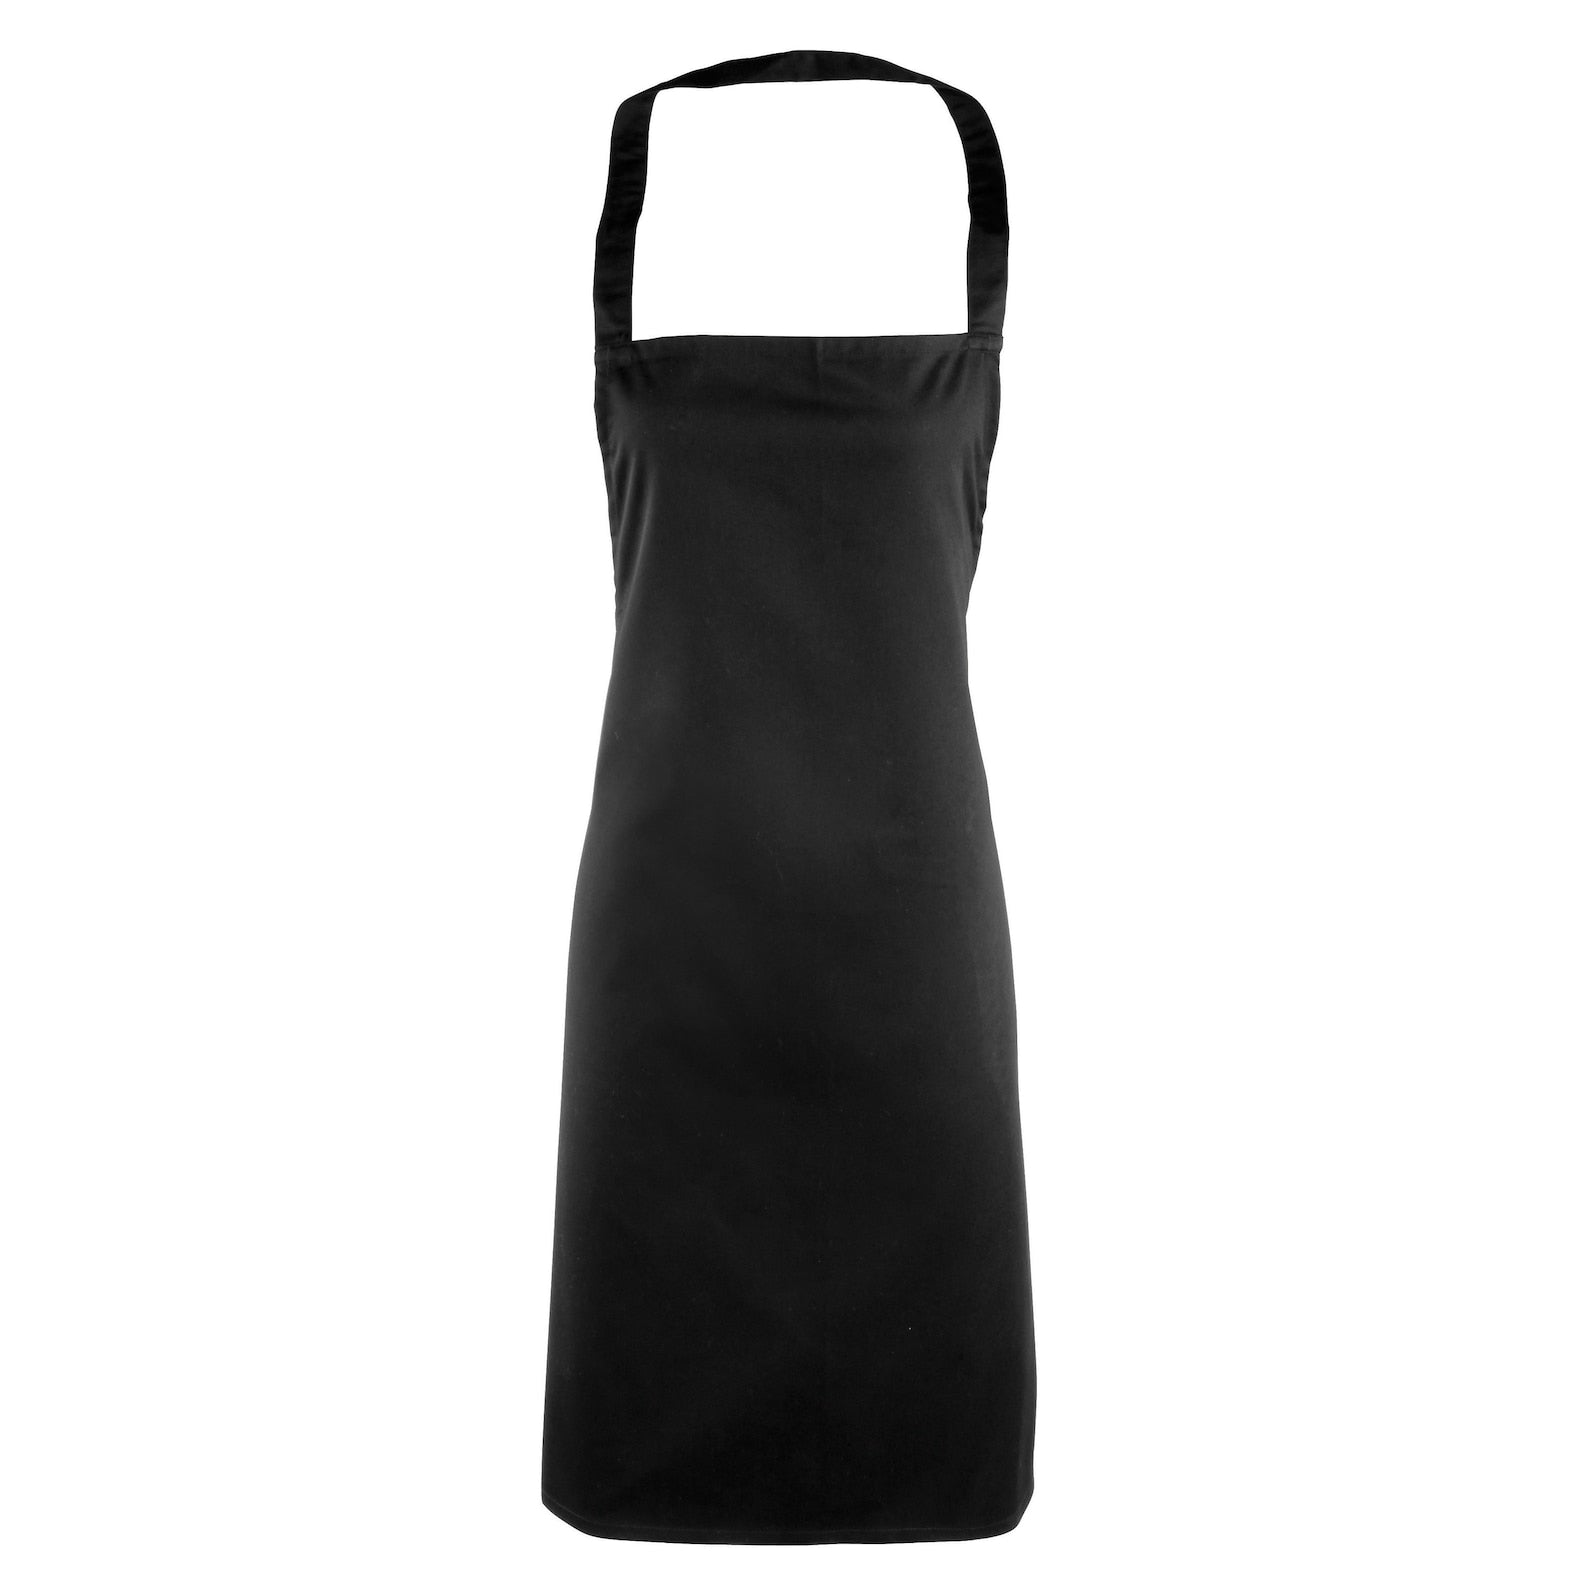 chef aprons for men